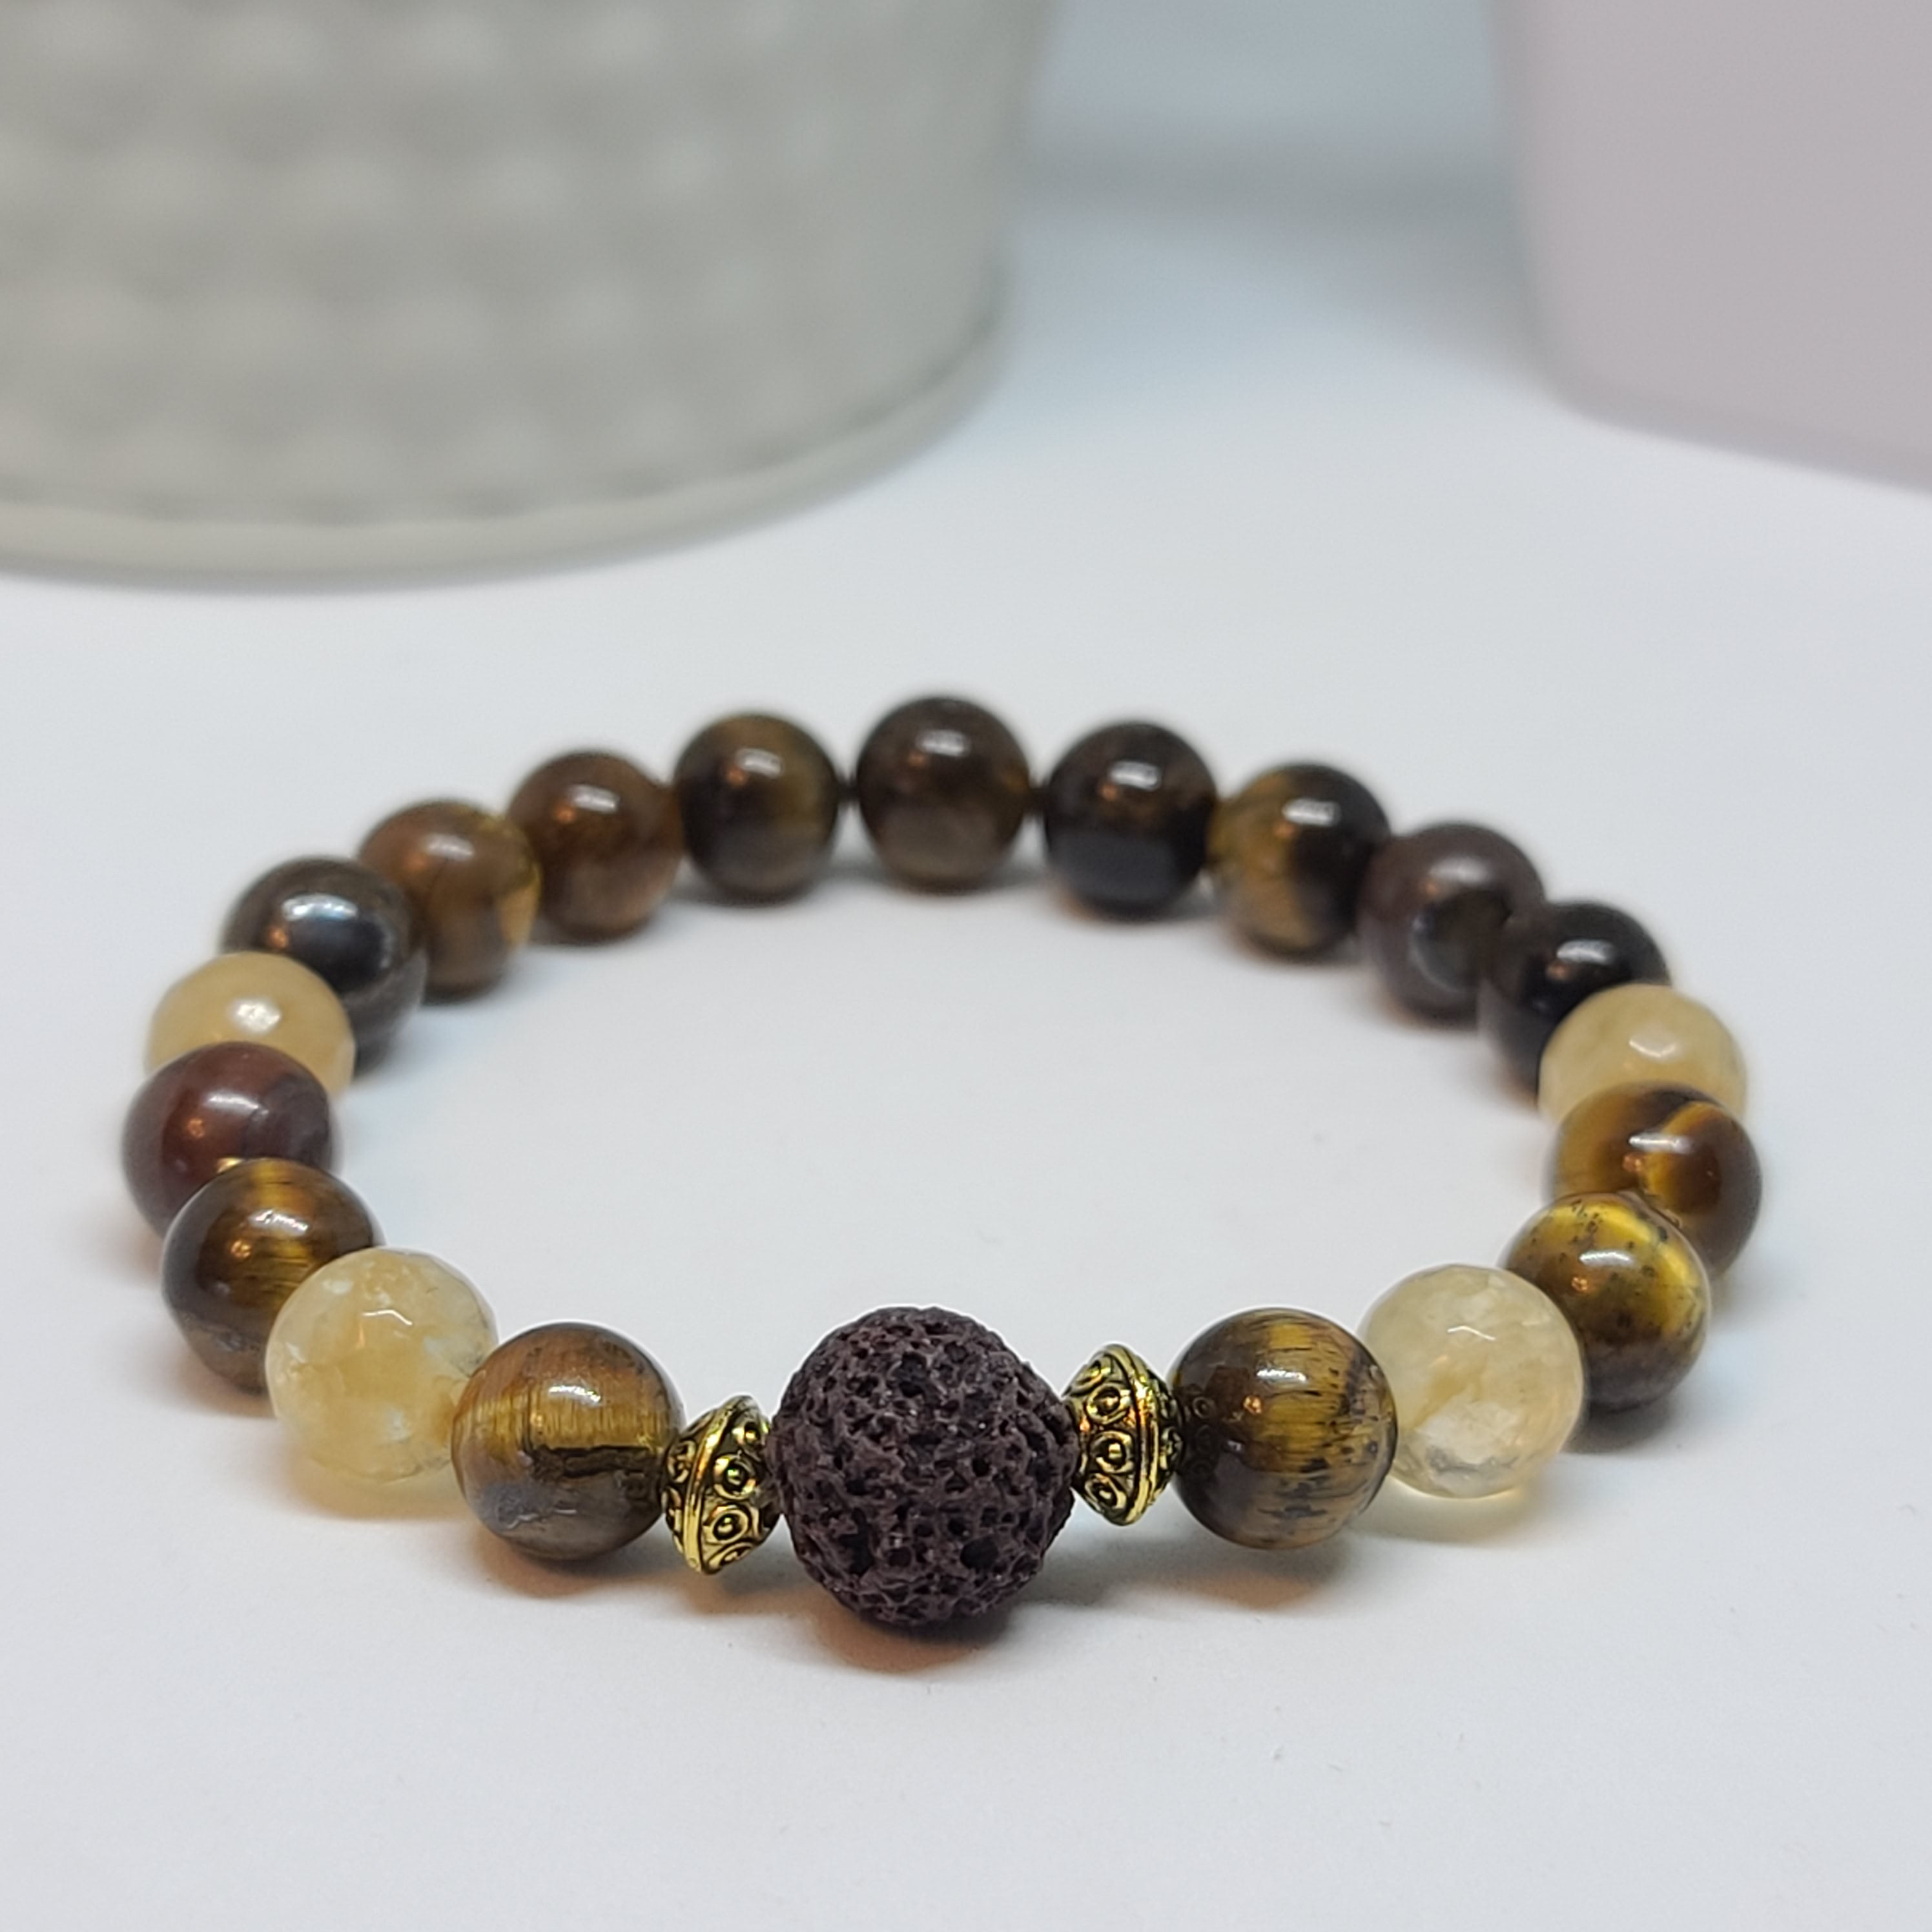 Tiger Eye and Faceted Citrine Stone- Size Medium